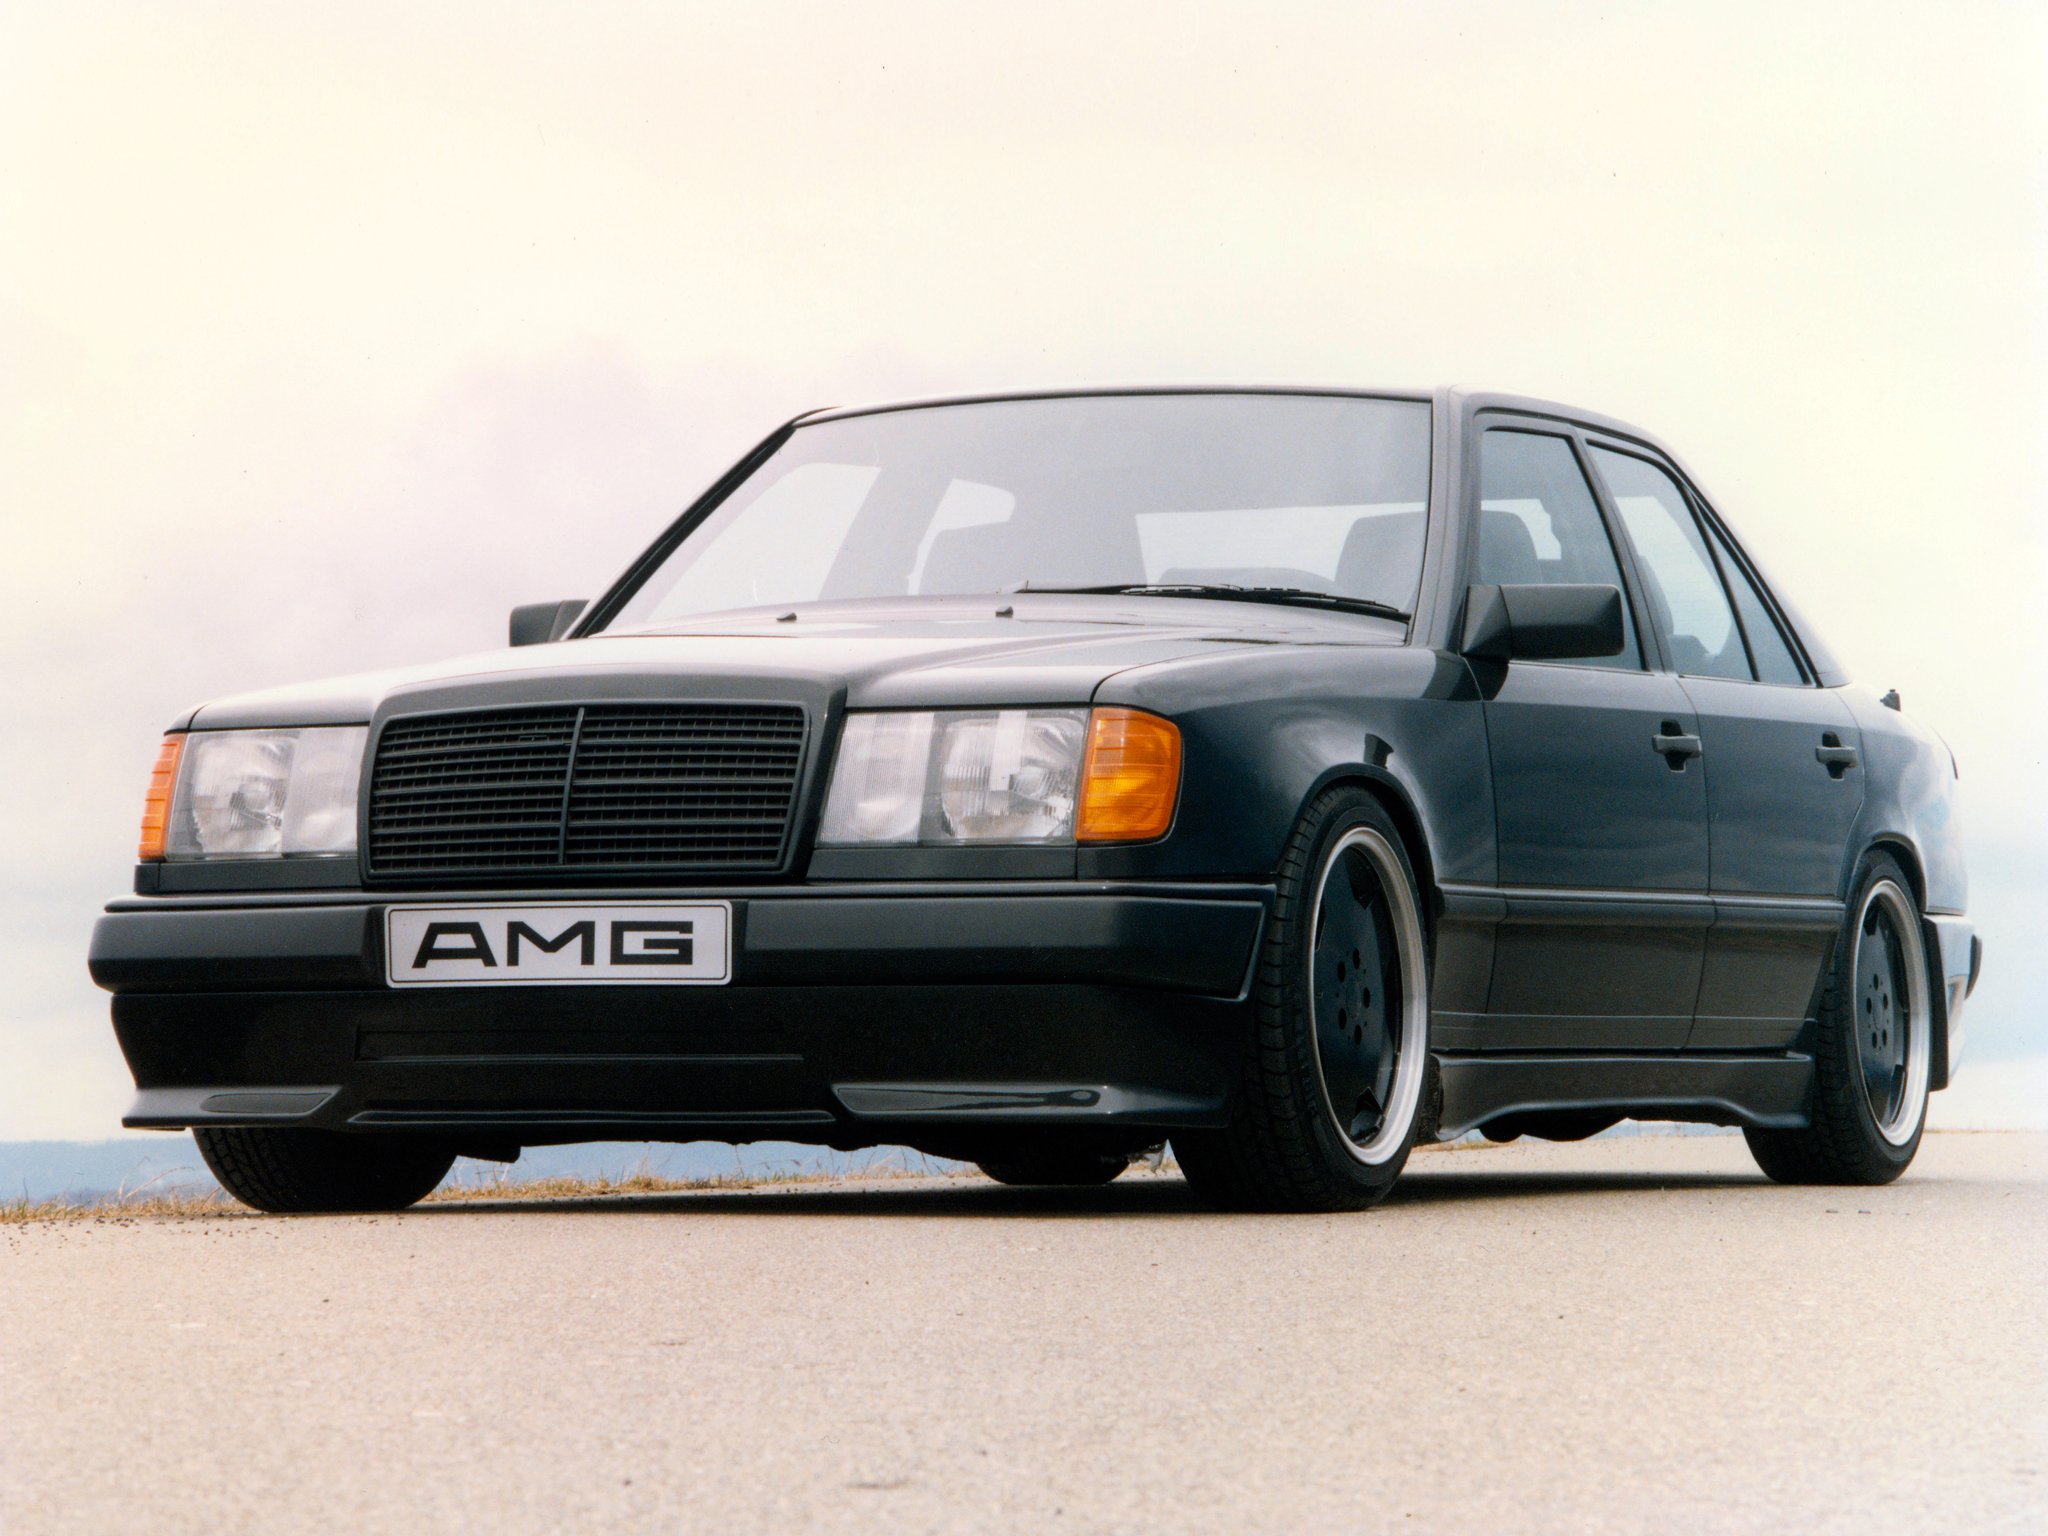 1988 91 Mercedes Benz Amg 300e Hammer W124 300 Wallpapers Hd Desktop And Mobile Backgrounds